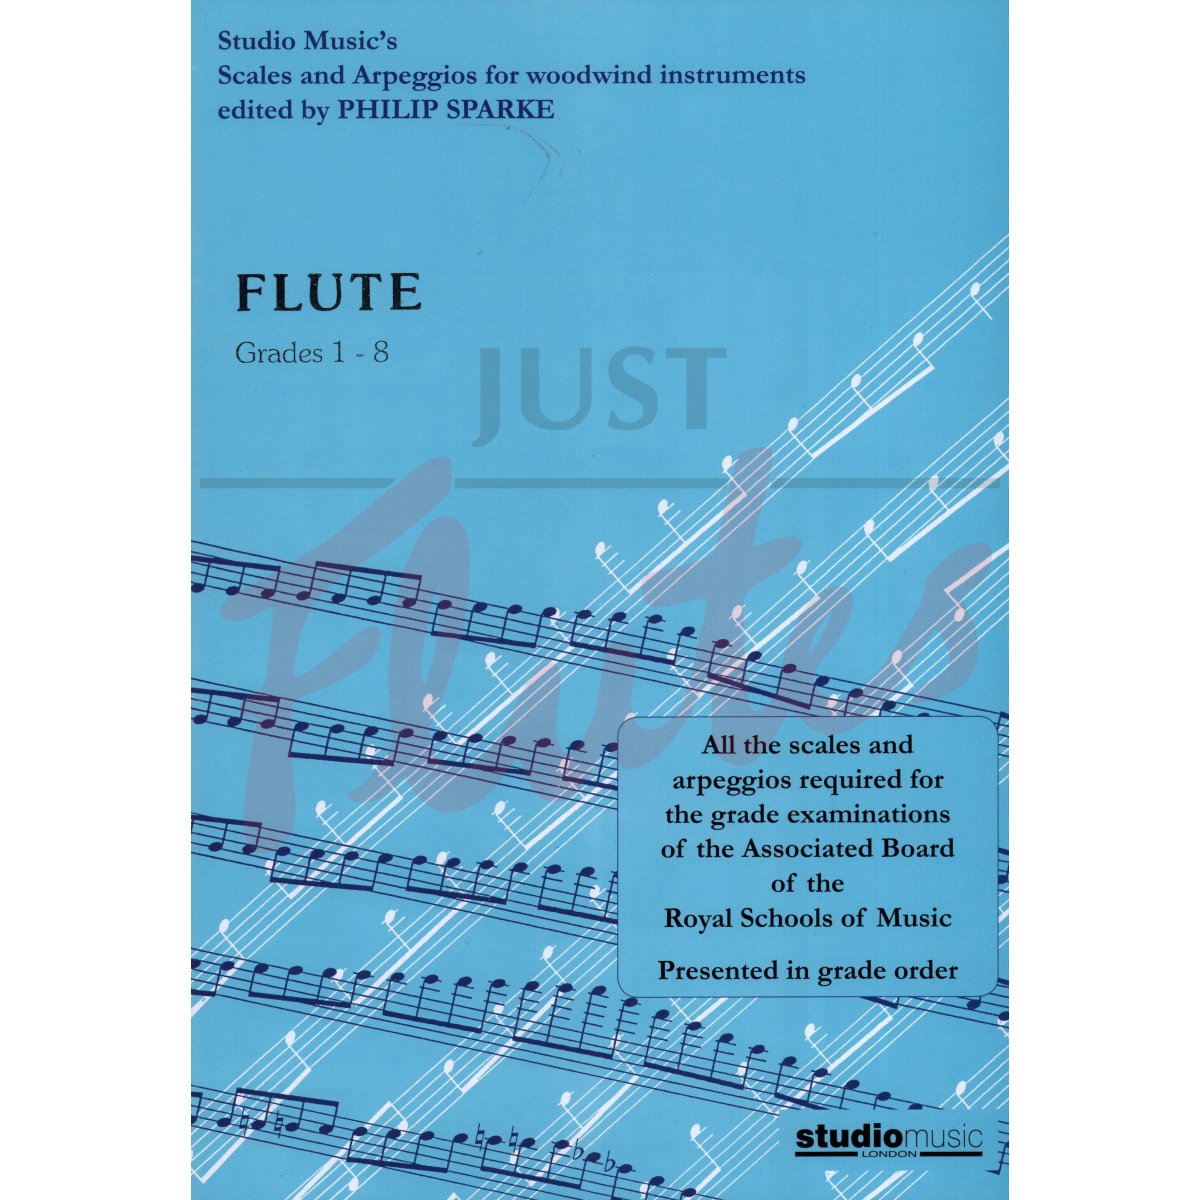 Scales and Arpeggios Grades 1-8 from 2018 [Flute]